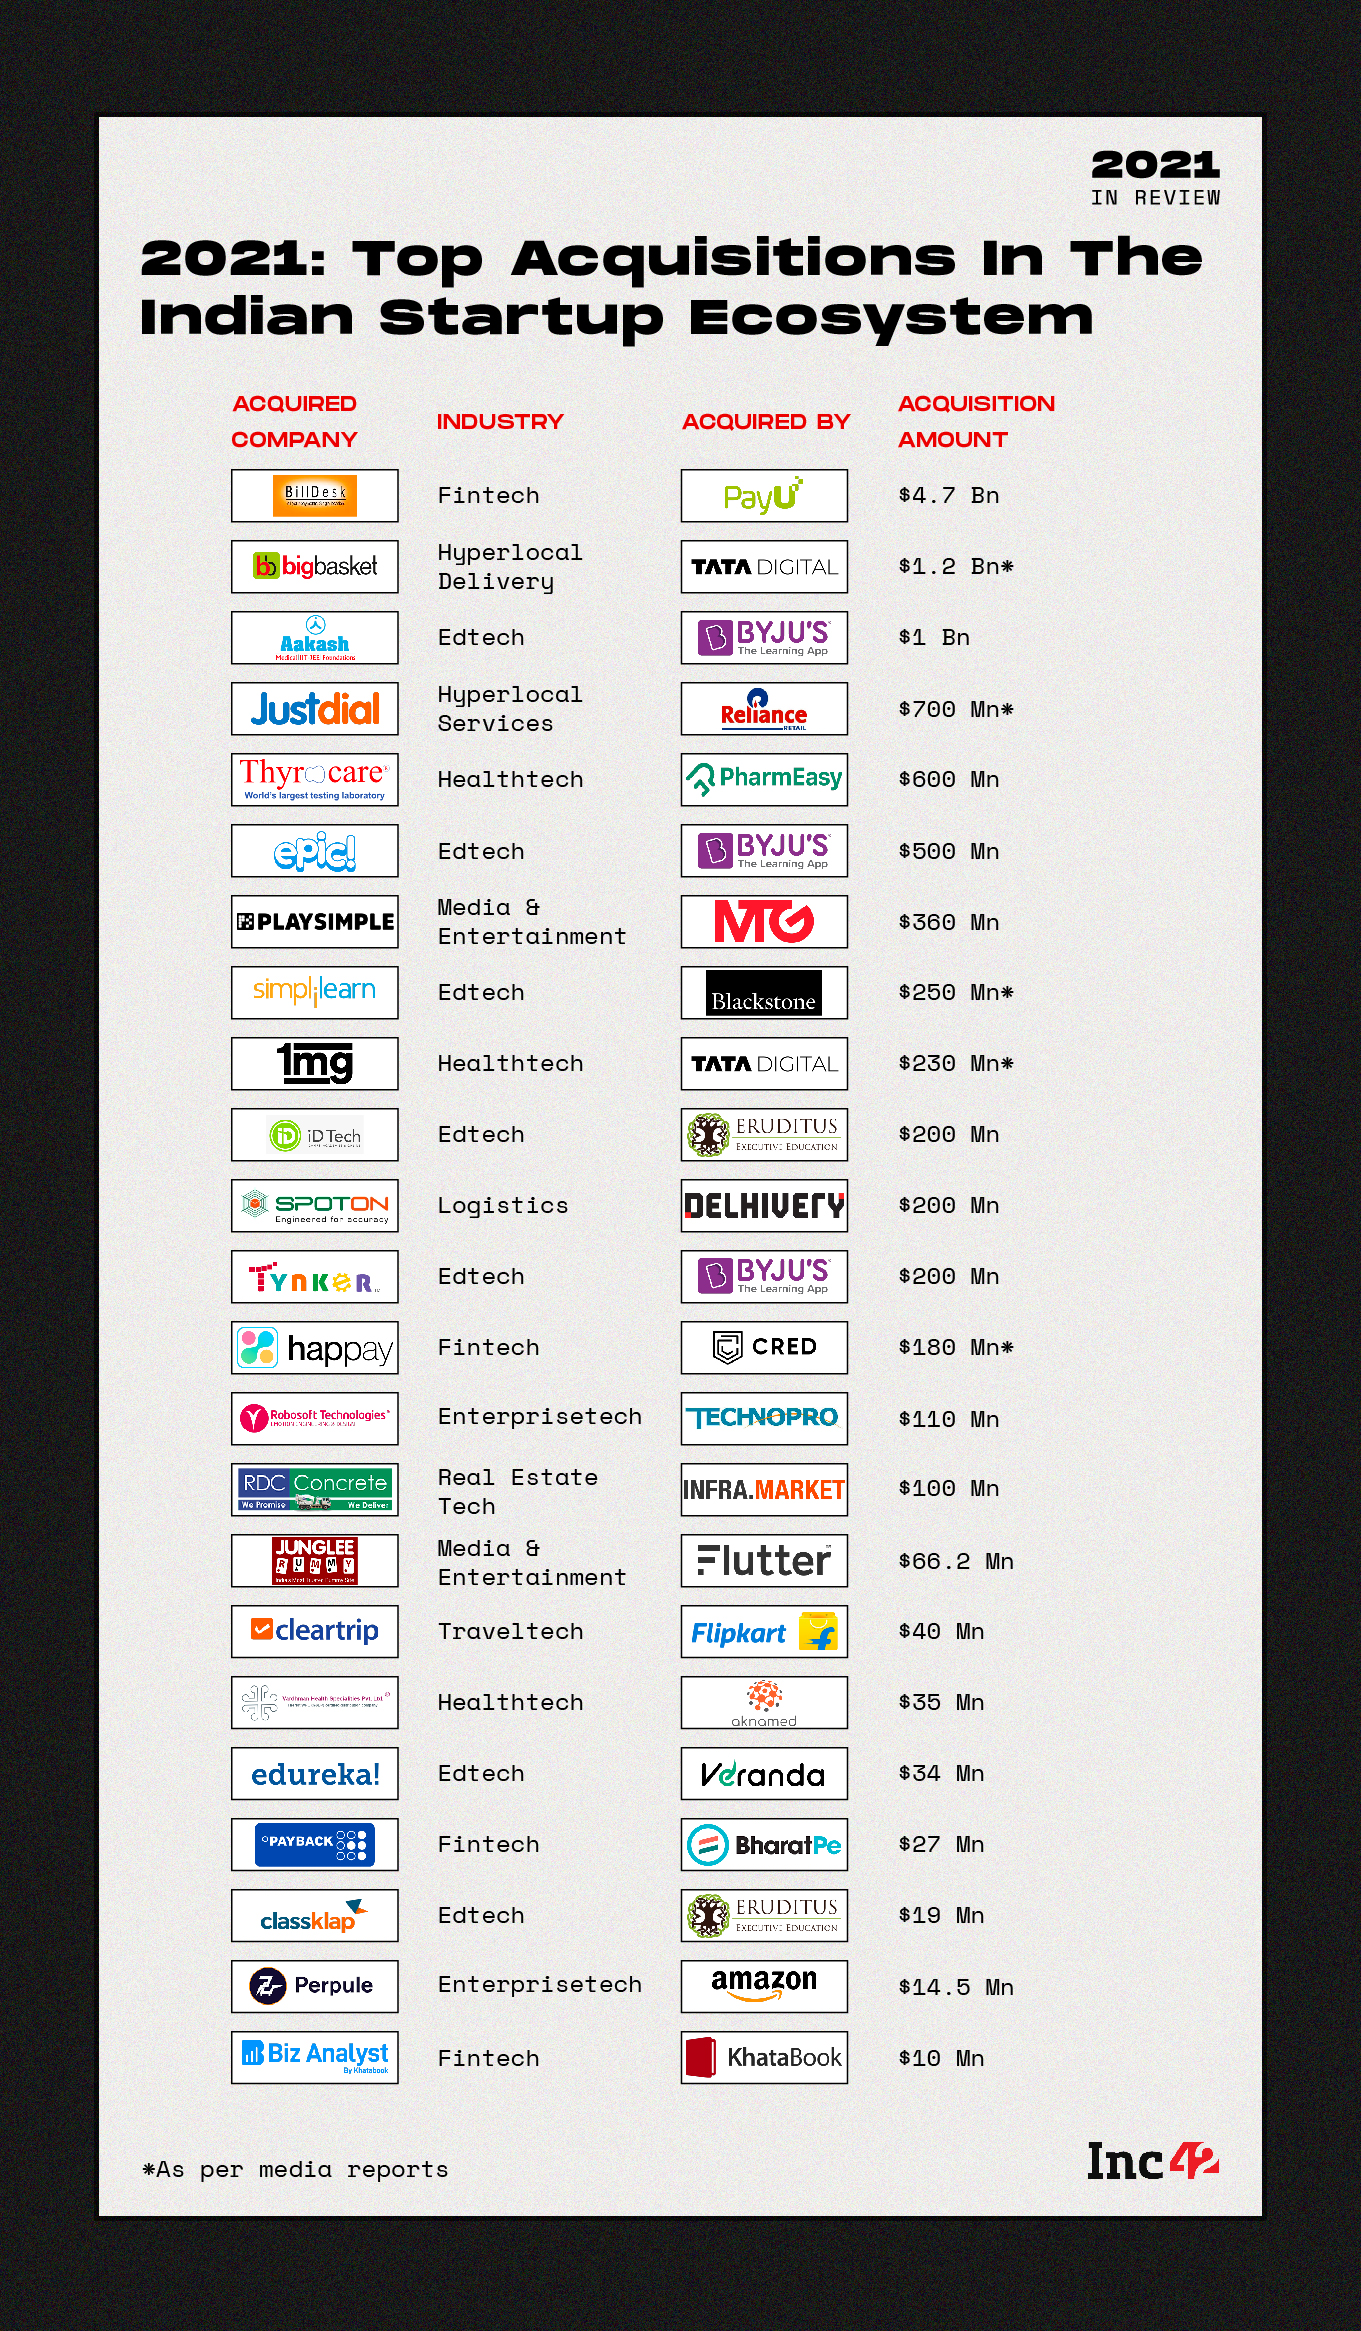 2021 In Review: Here Is The List Of Top Startup Acquisitions & The Top Acquirers Of The Year